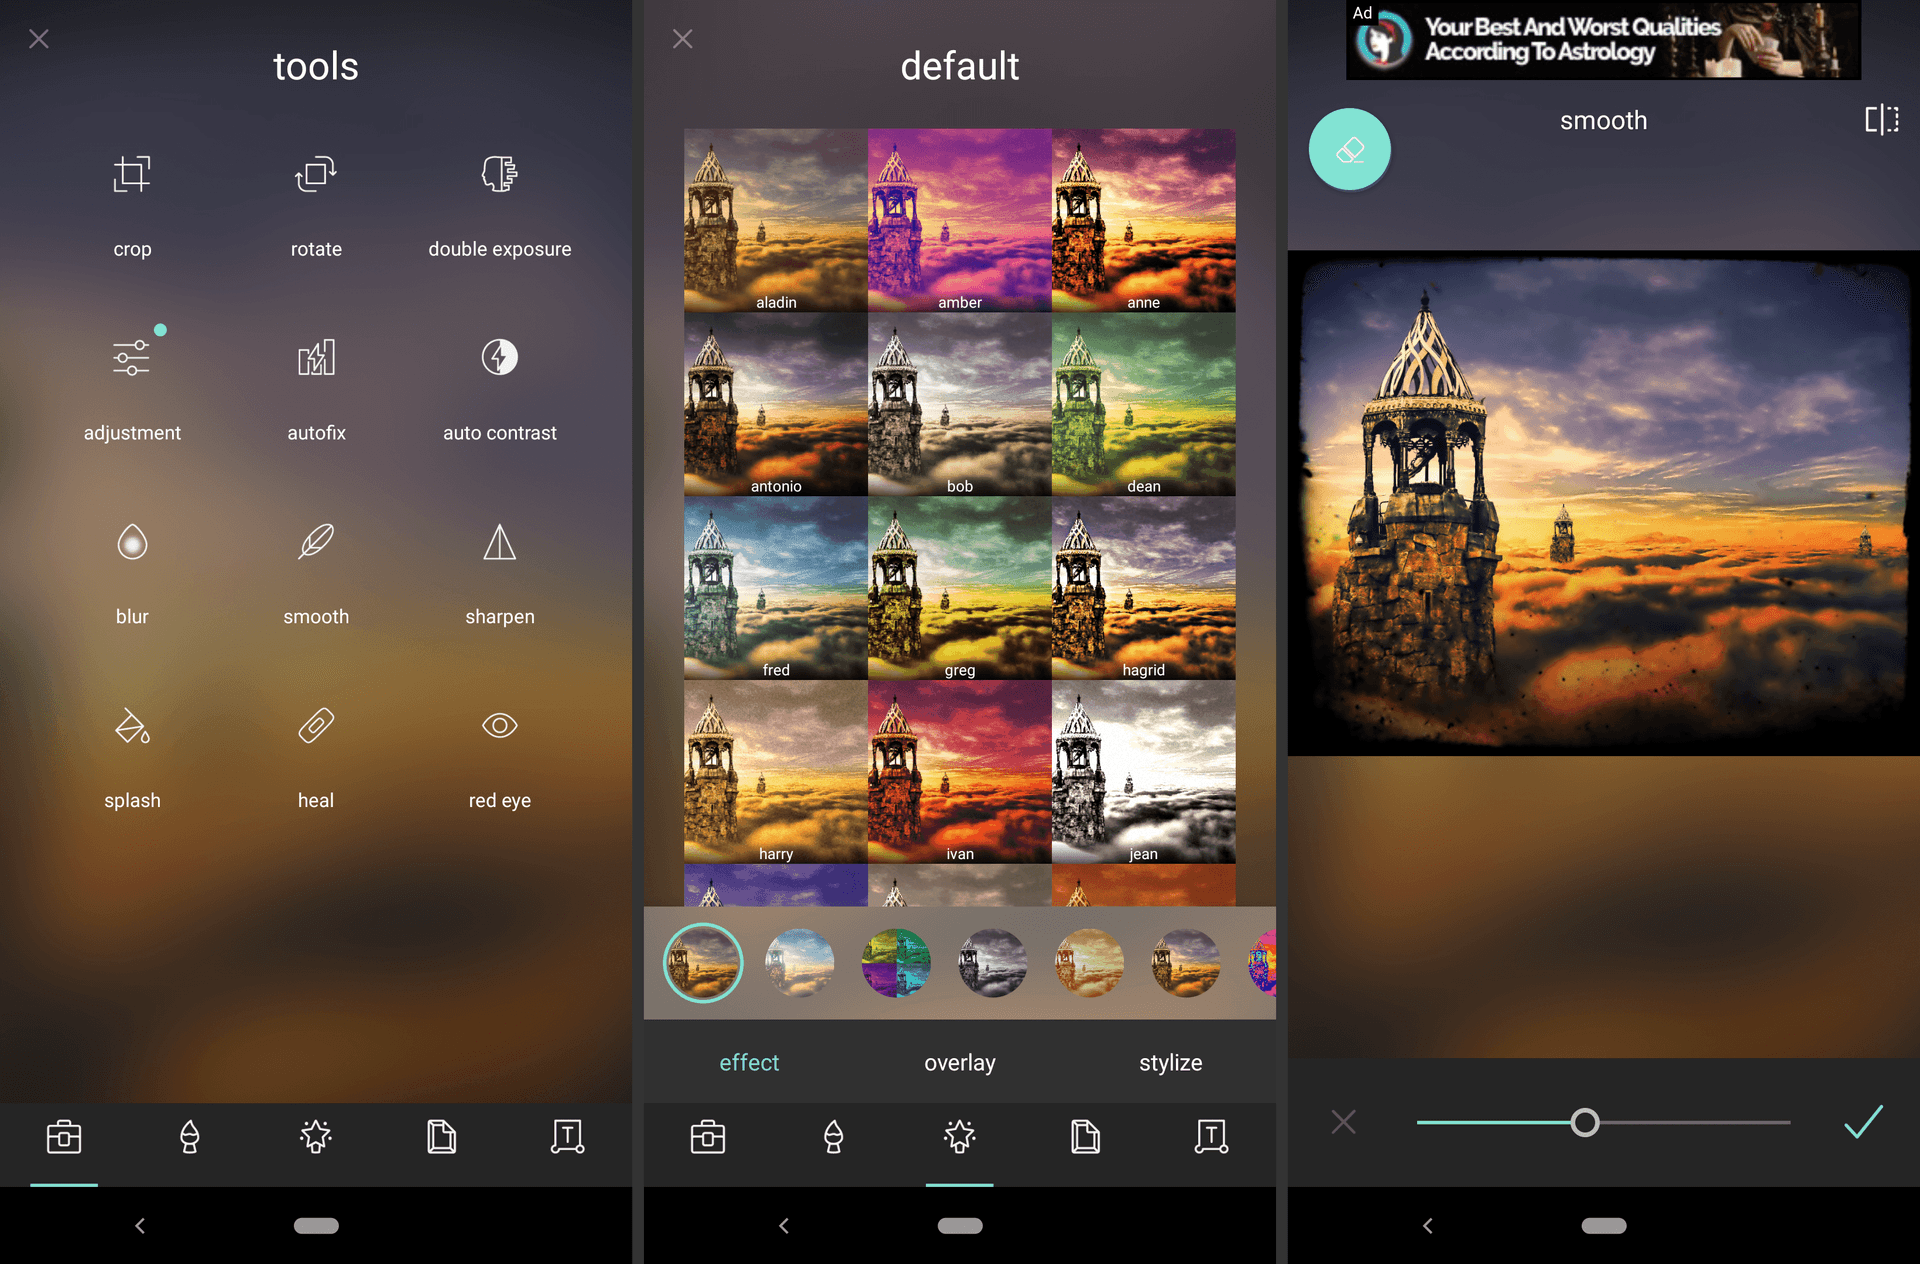 A Screenshot Of The Photo Editor App On A Phone